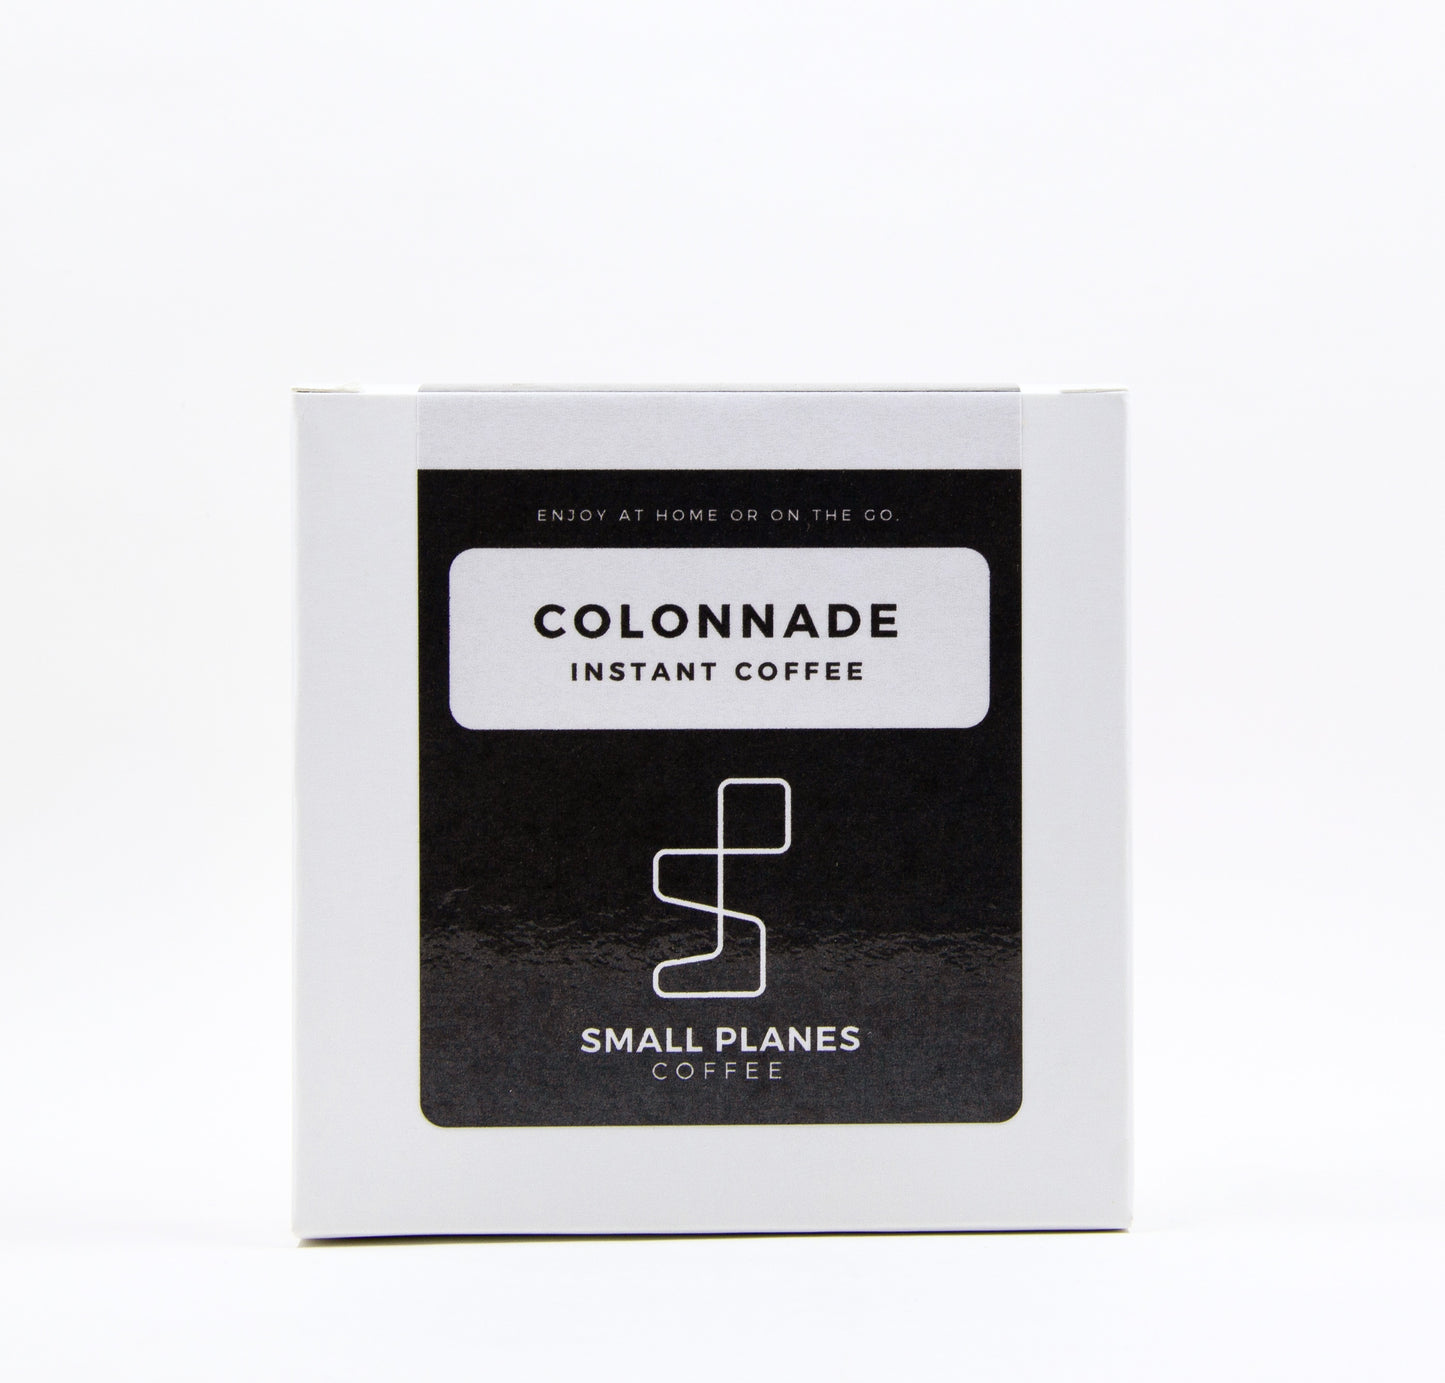 Colonnade Instant Coffee